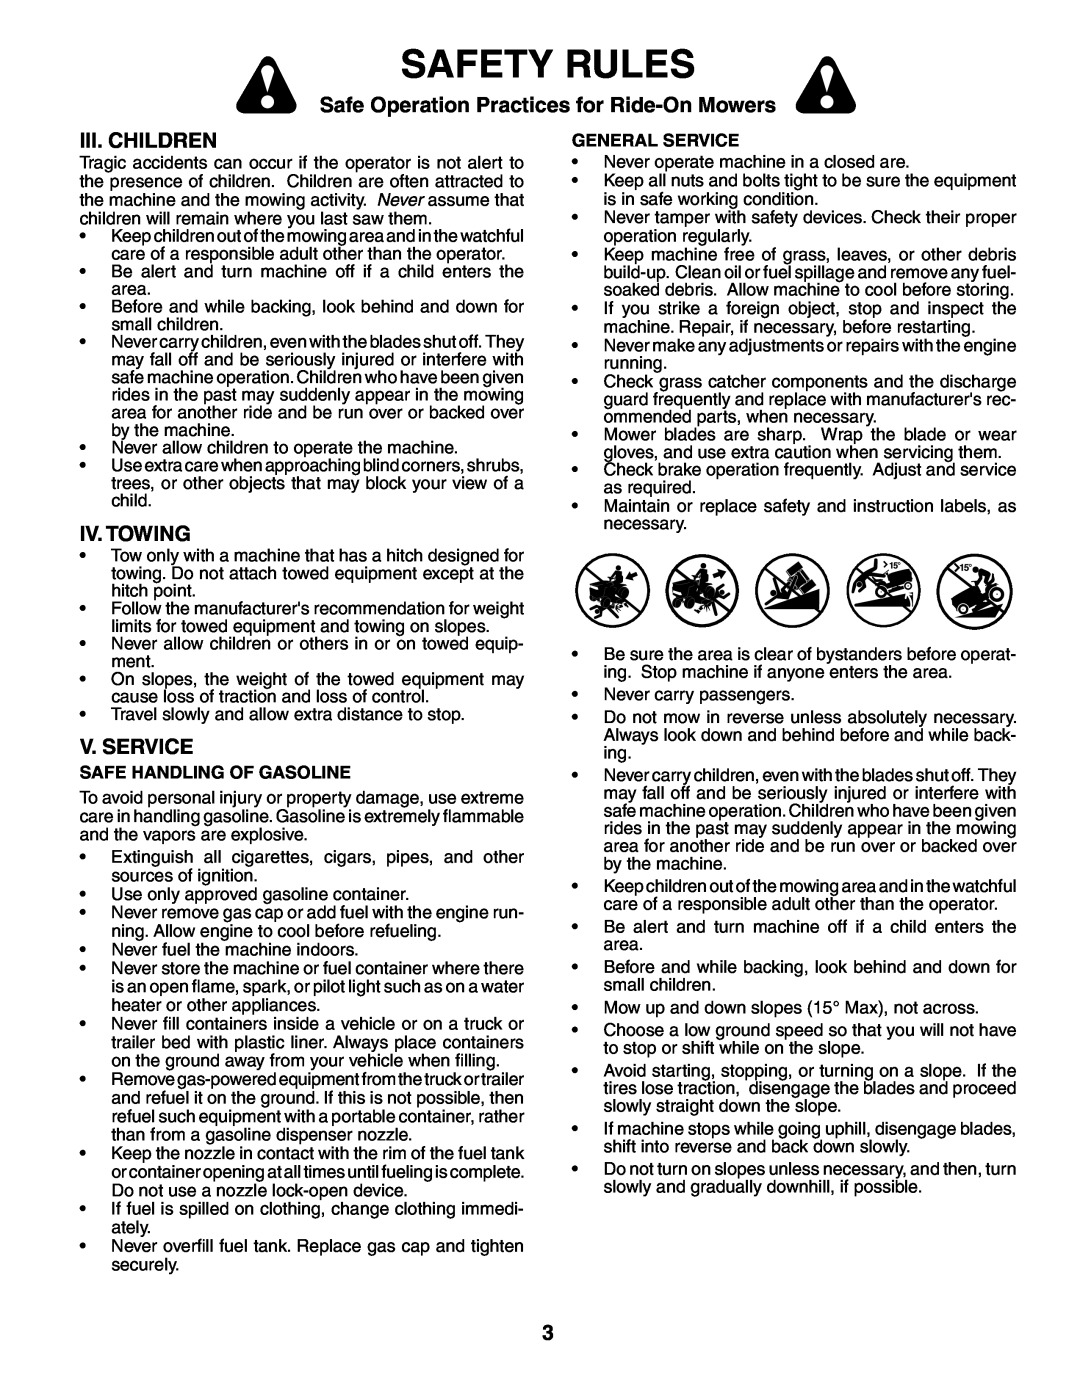 Poulan 960120003 manual Iii. Children, Iv. Towing, V. Service, Safety Rules, Safe Operation Practices for Ride-On Mowers 